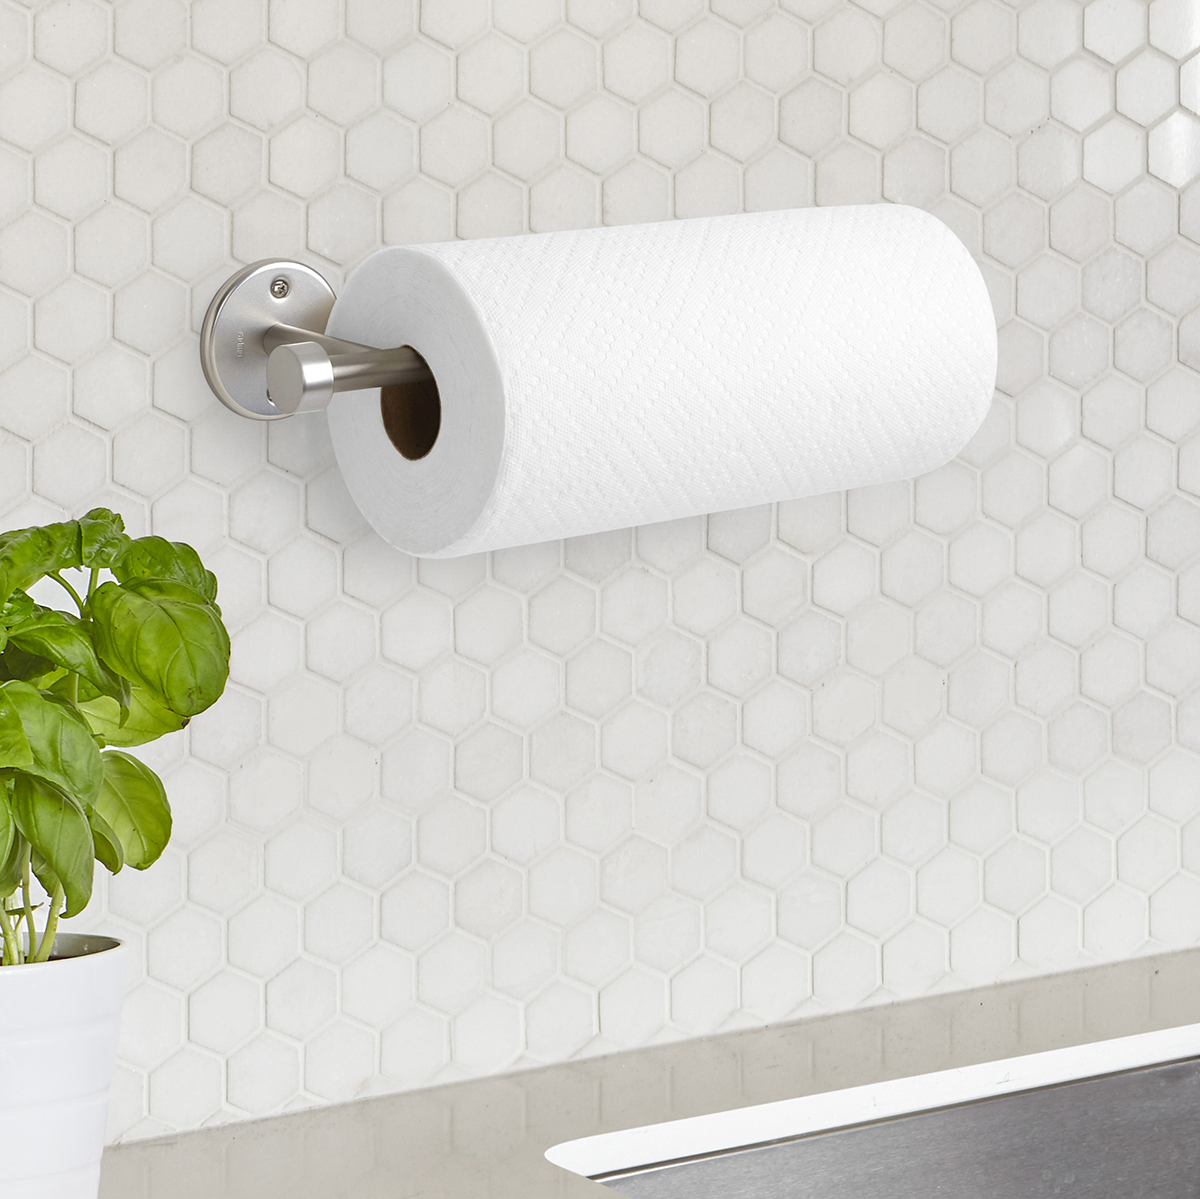 https://www.containerstore.com/catalogimages/342619/10073752-cappa-wall-mount-paper-towe.jpg